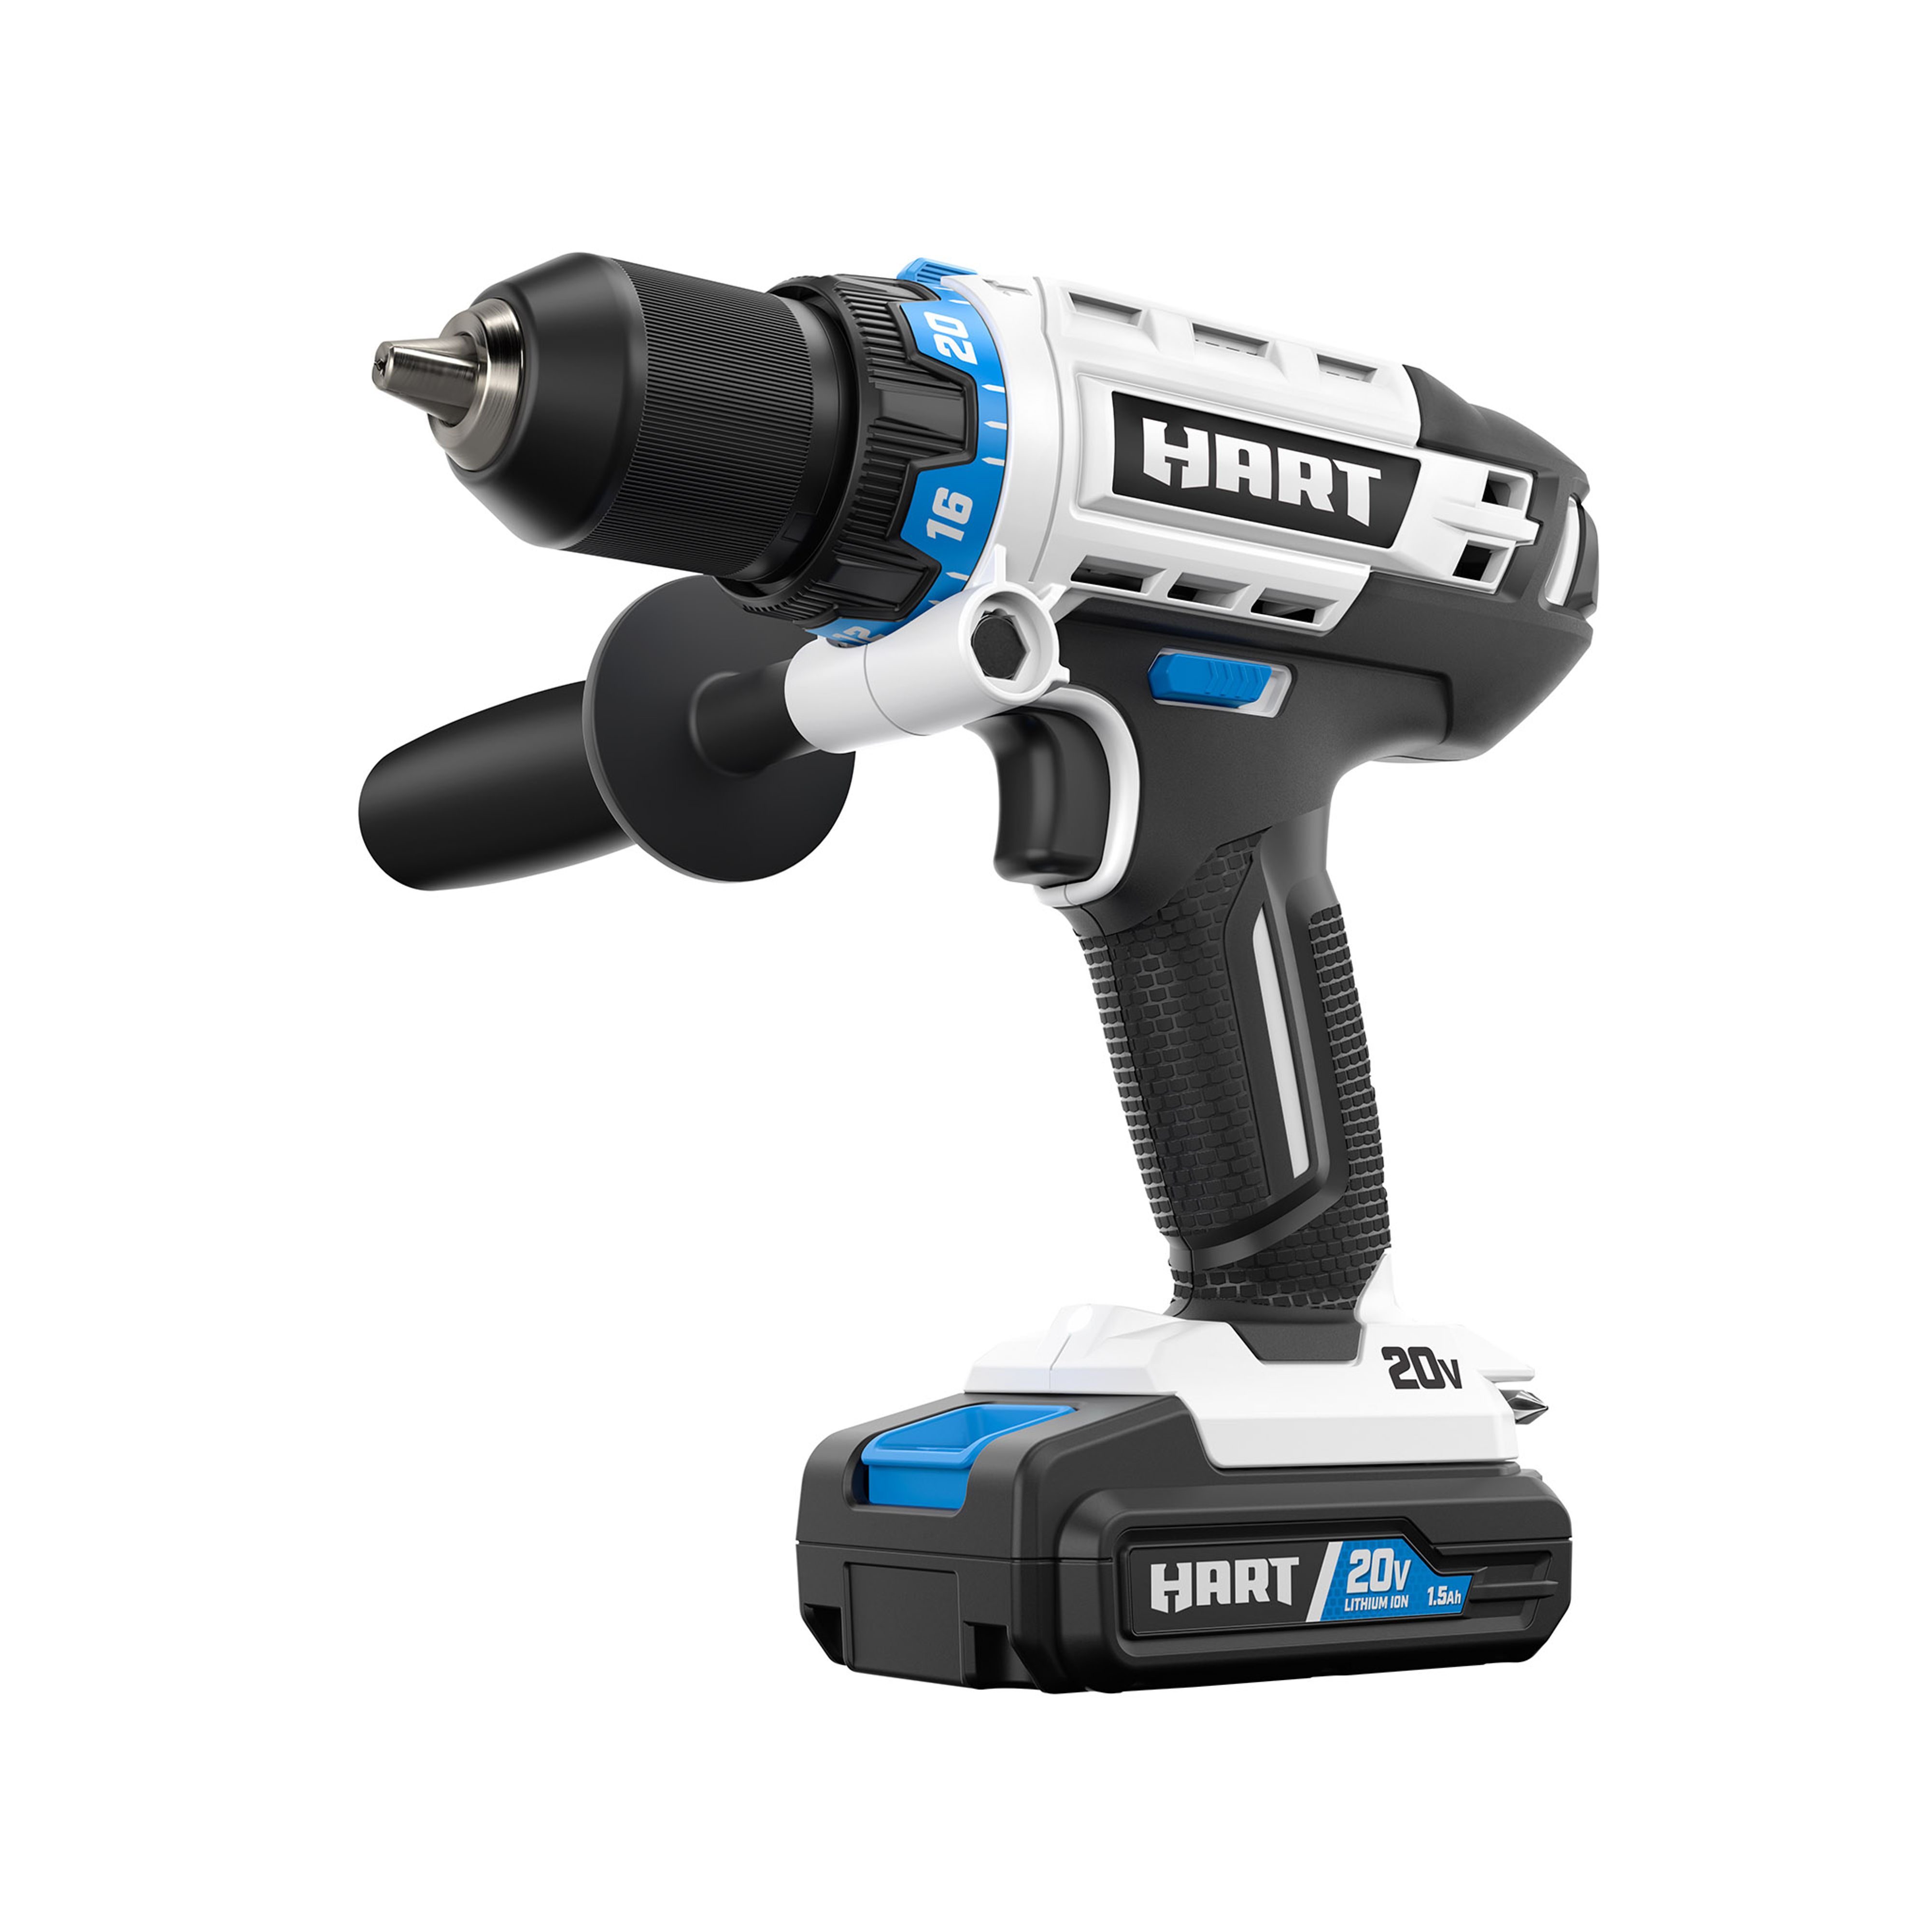 HART 20-Volt Cordless 1/2-inch Hammer Drill Kit (1) 1.5Ah Lithium-Ion Battery - image 1 of 11